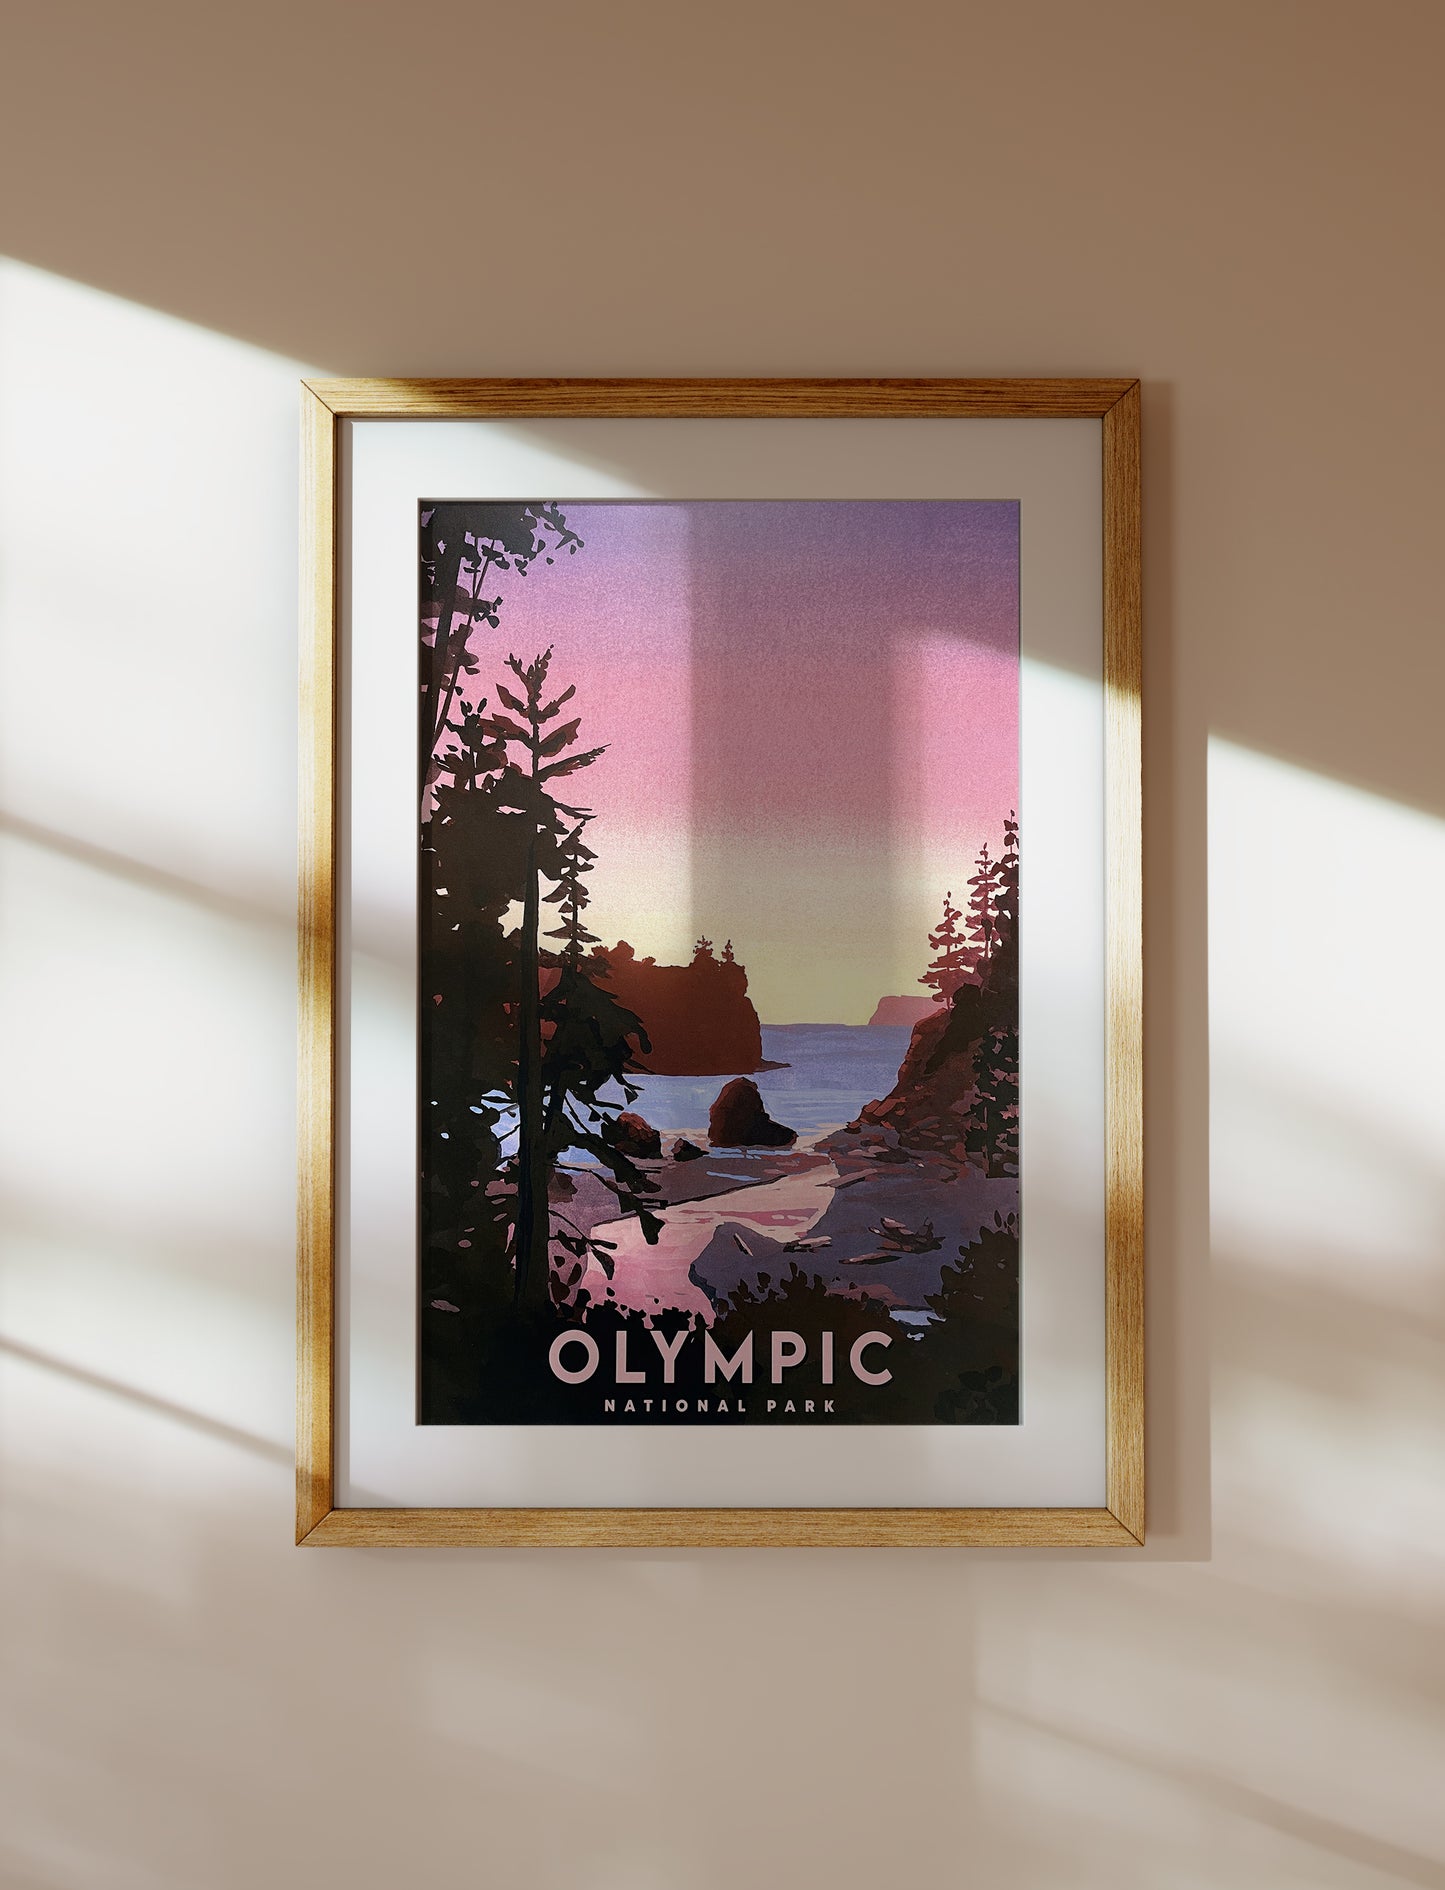 'Olympic' National Park Travel Poster